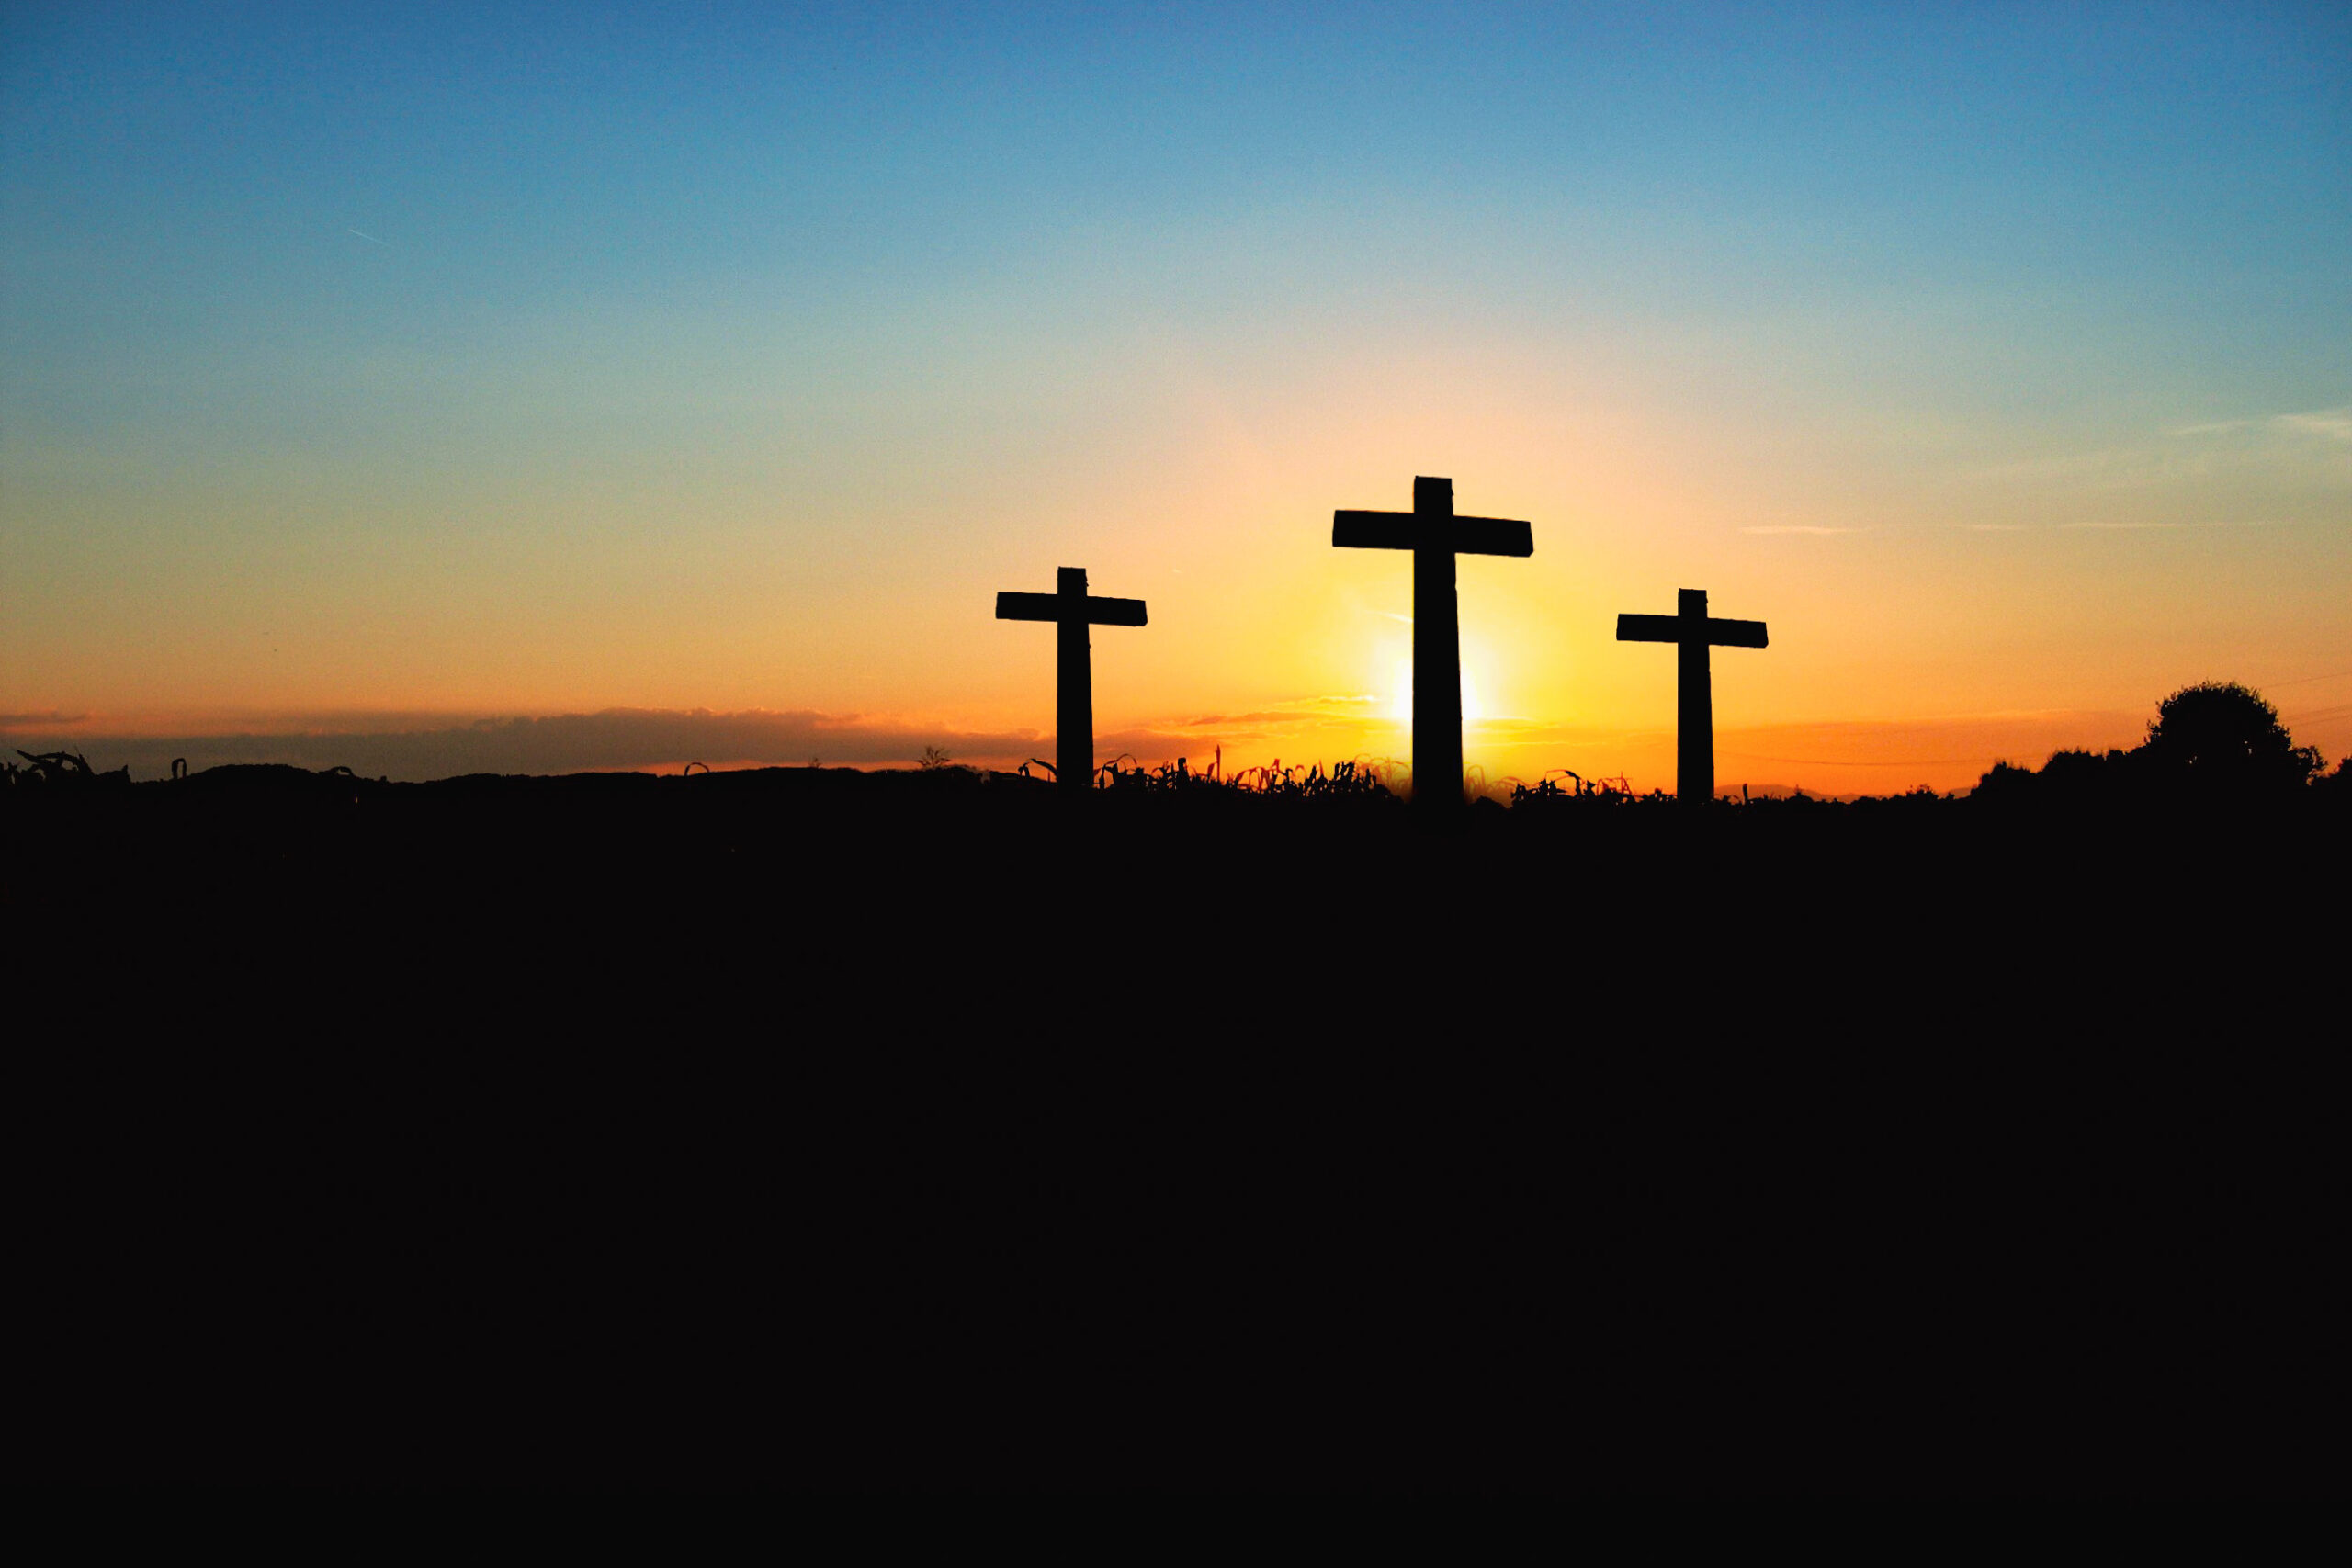 Silhouette of three crosses on a hillside set against a setting sun.